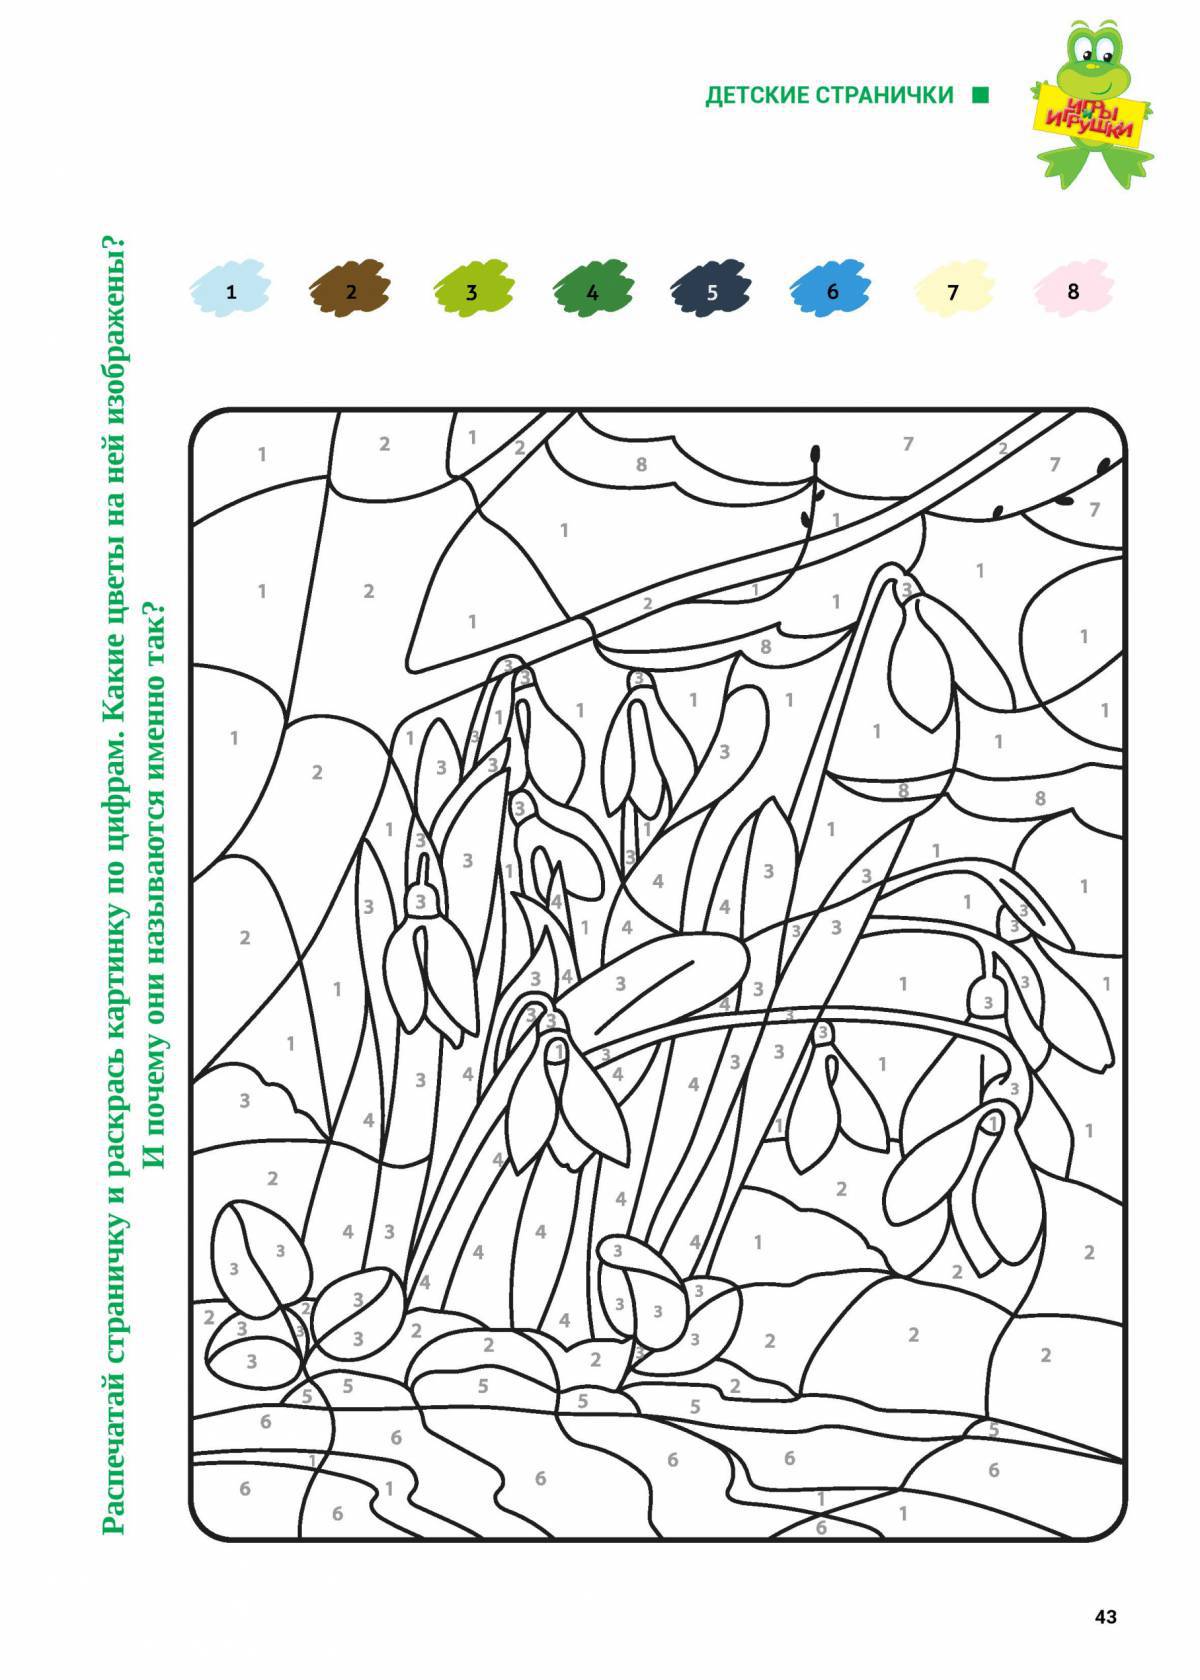 Complex coloring by numbers for all adults on your phone